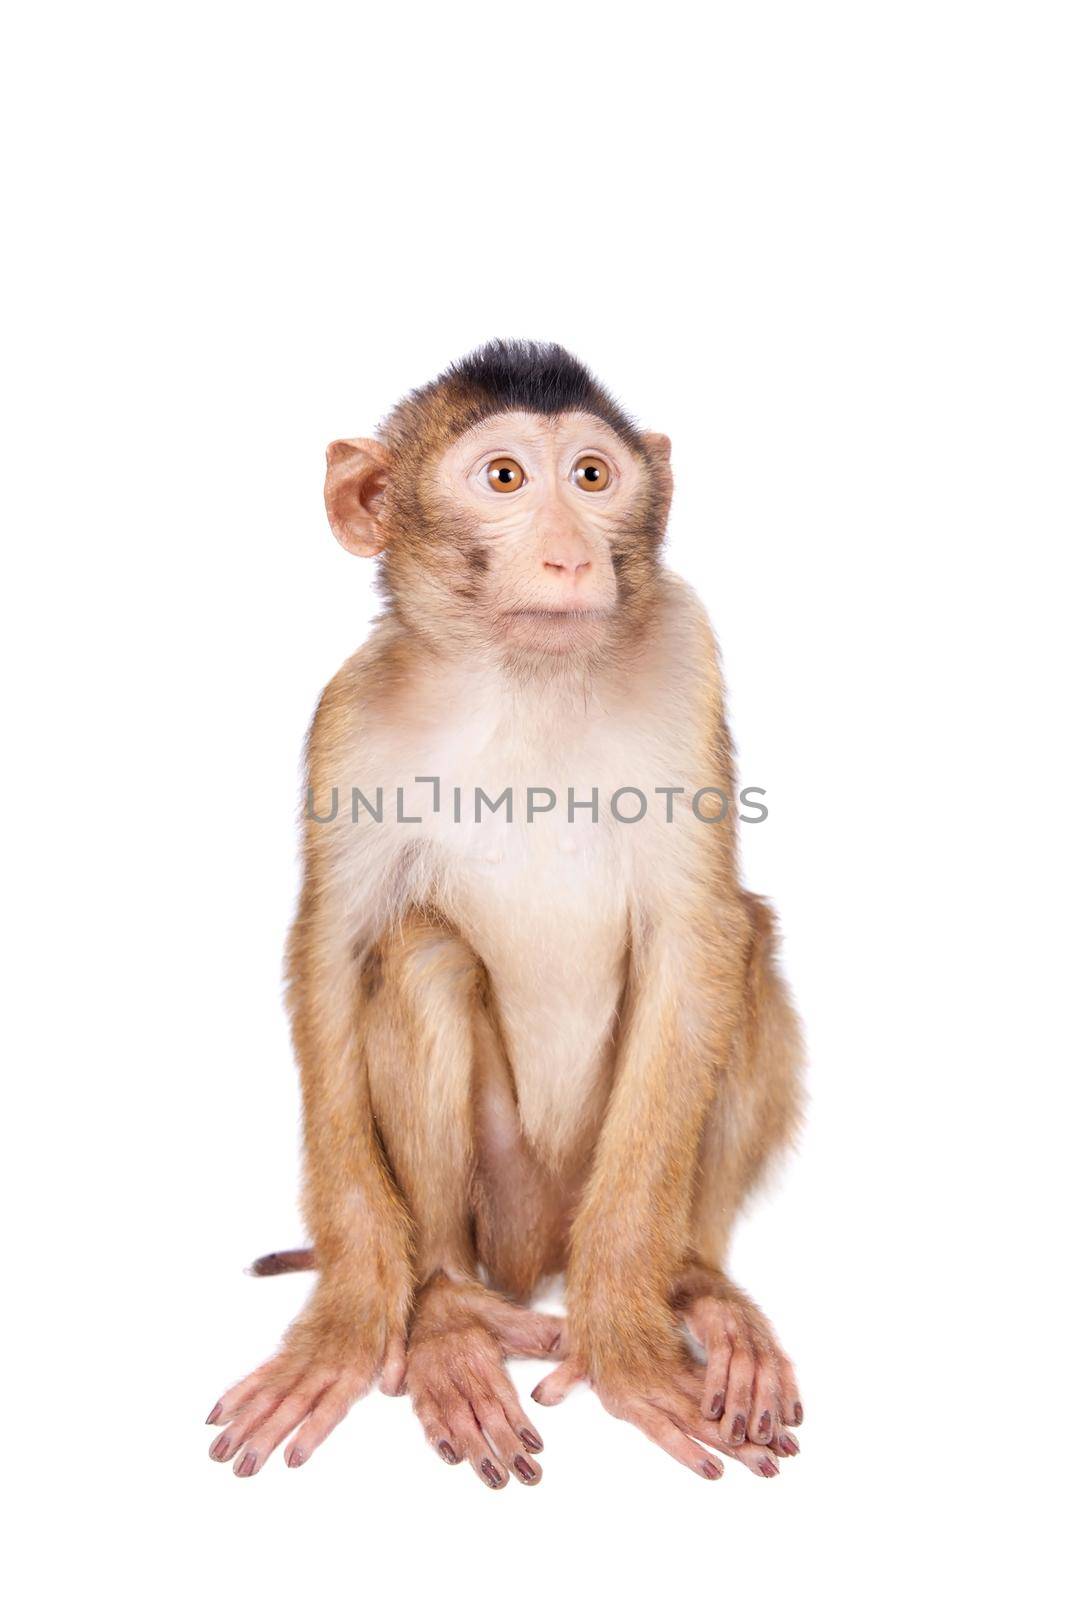 Juvenile Pig-tailed Macaque, Macaca nemestrina, on white by RosaJay